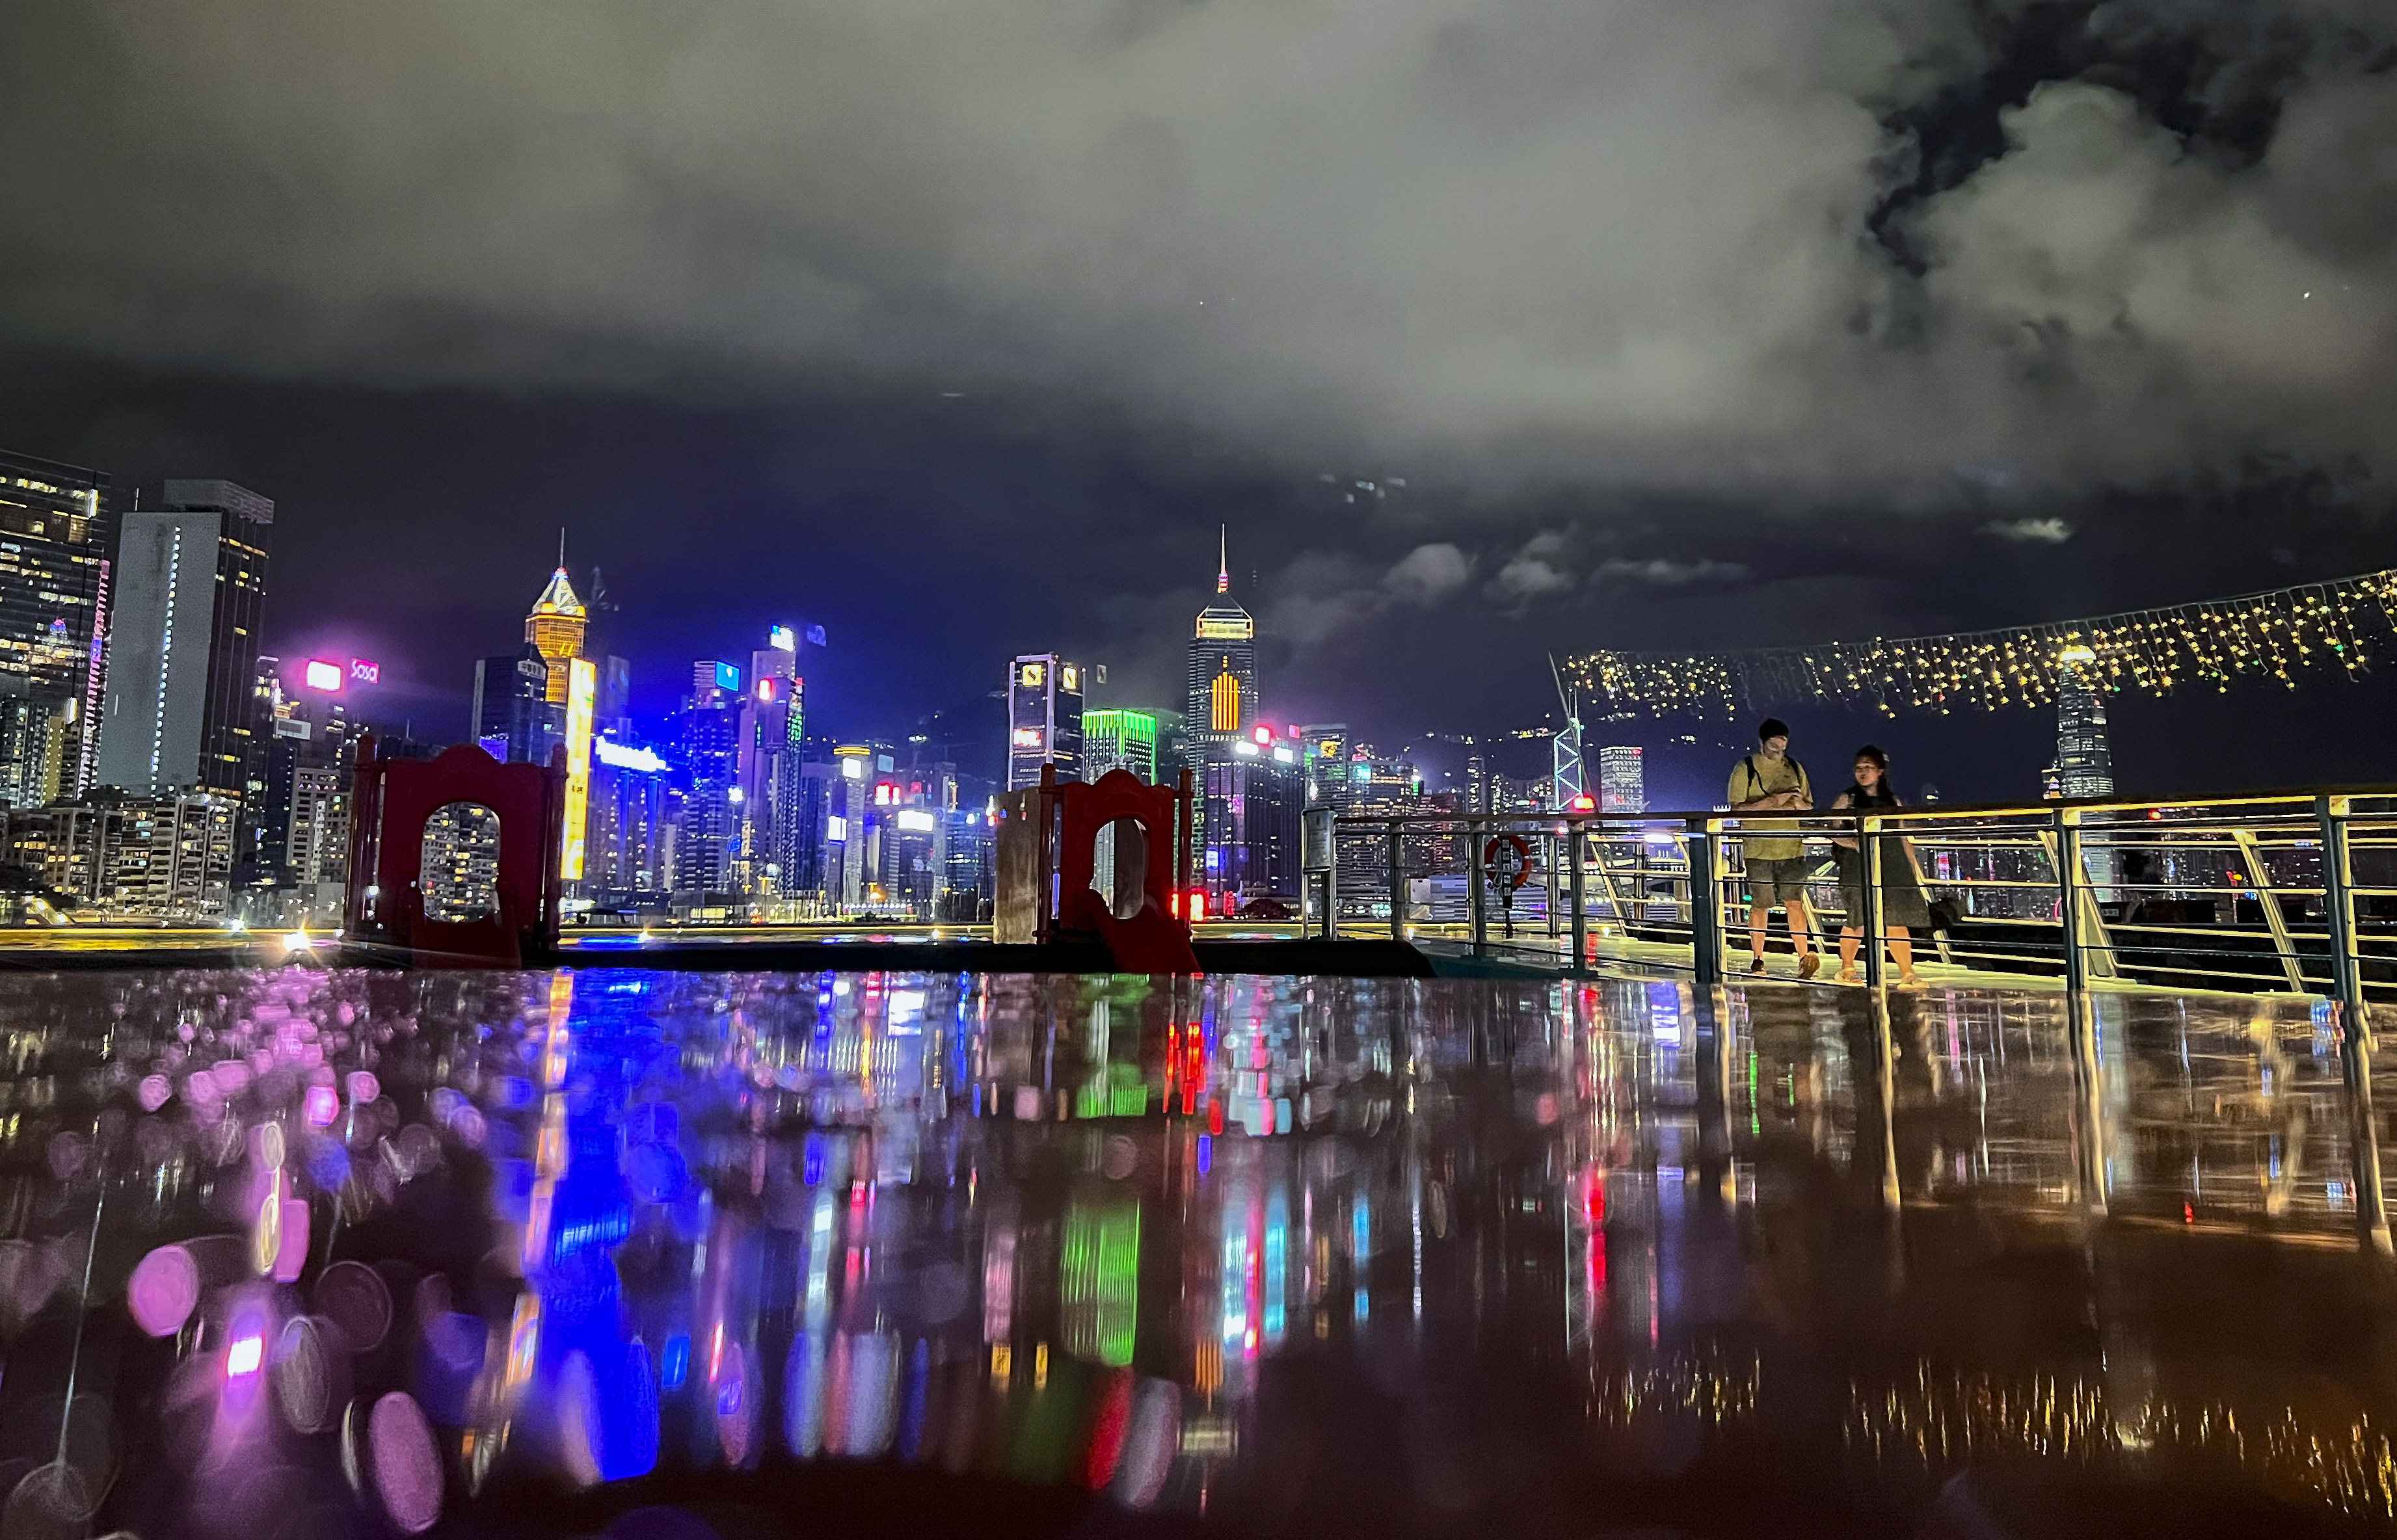 Hong Kong has been transitioning away from coal as a fuel type to generate electricity. Photo: Martin Chan